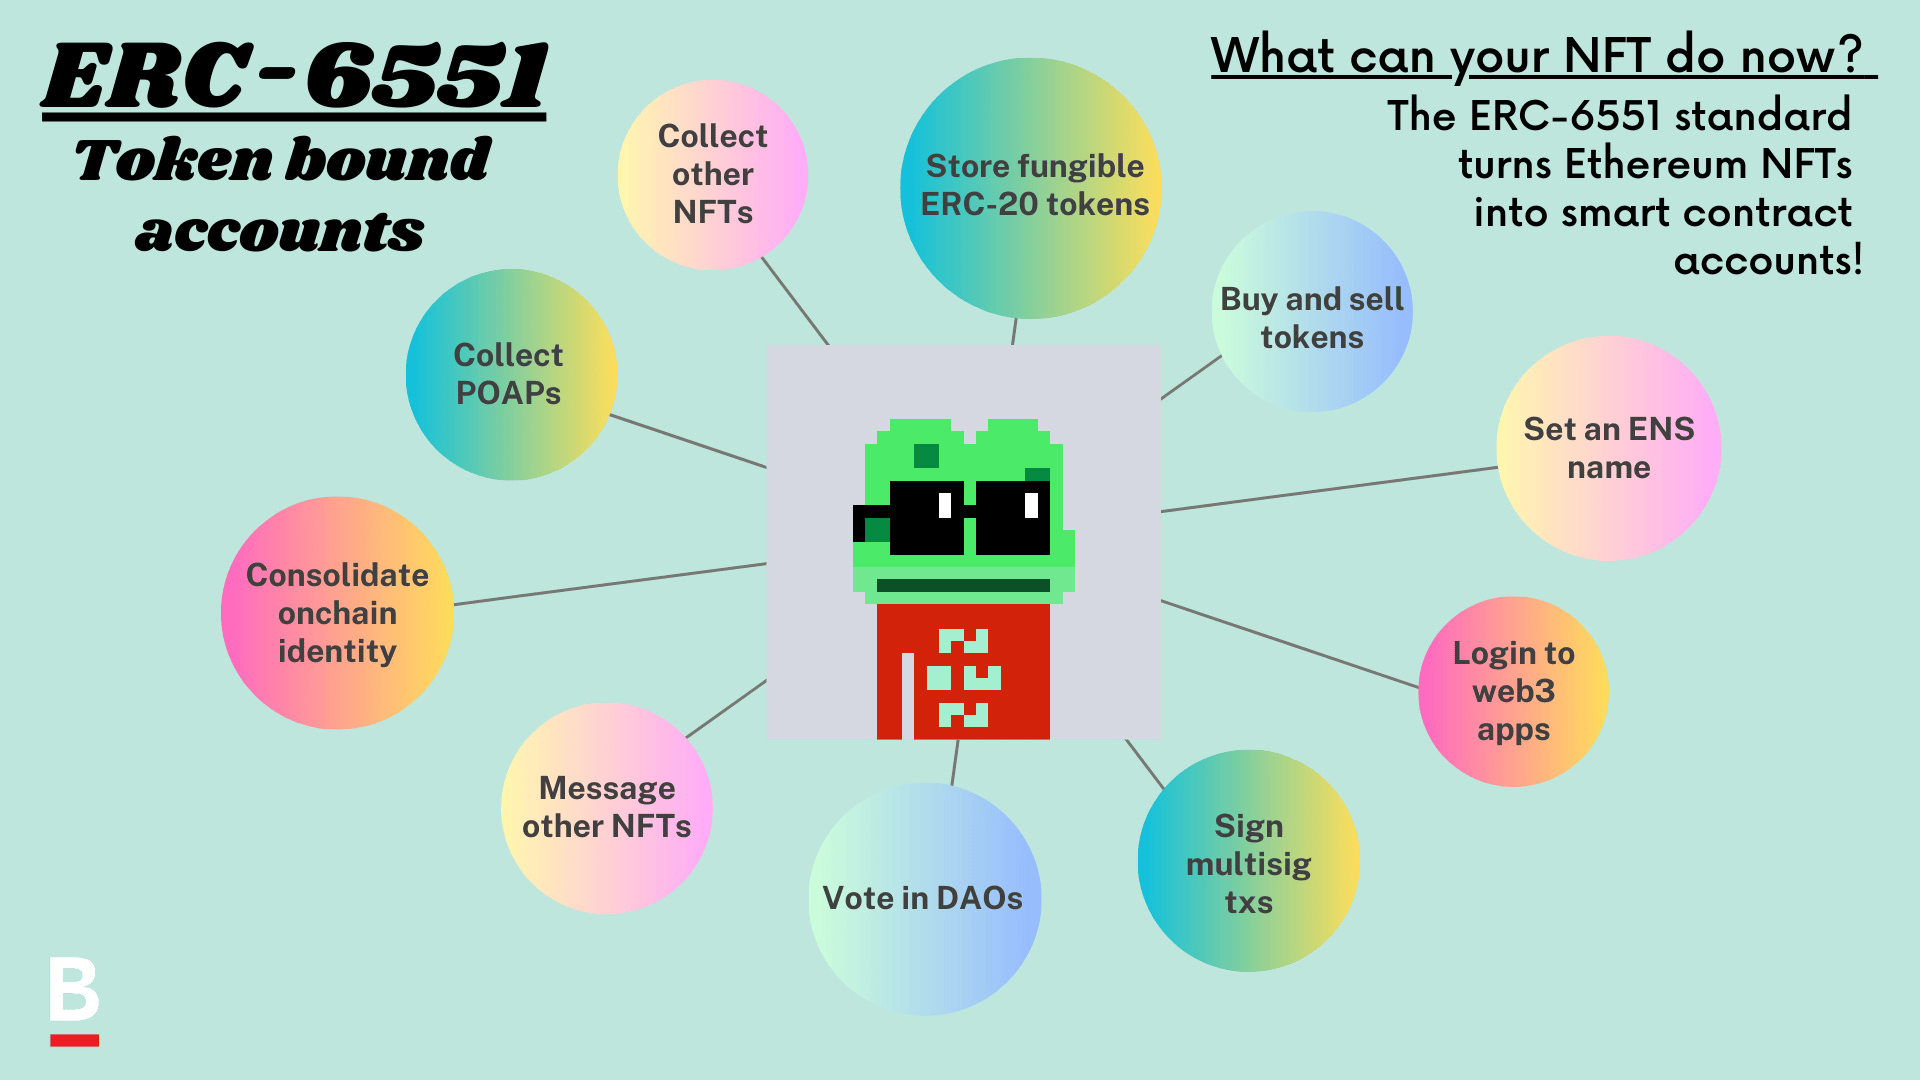 Features of ERC-6551 NFT